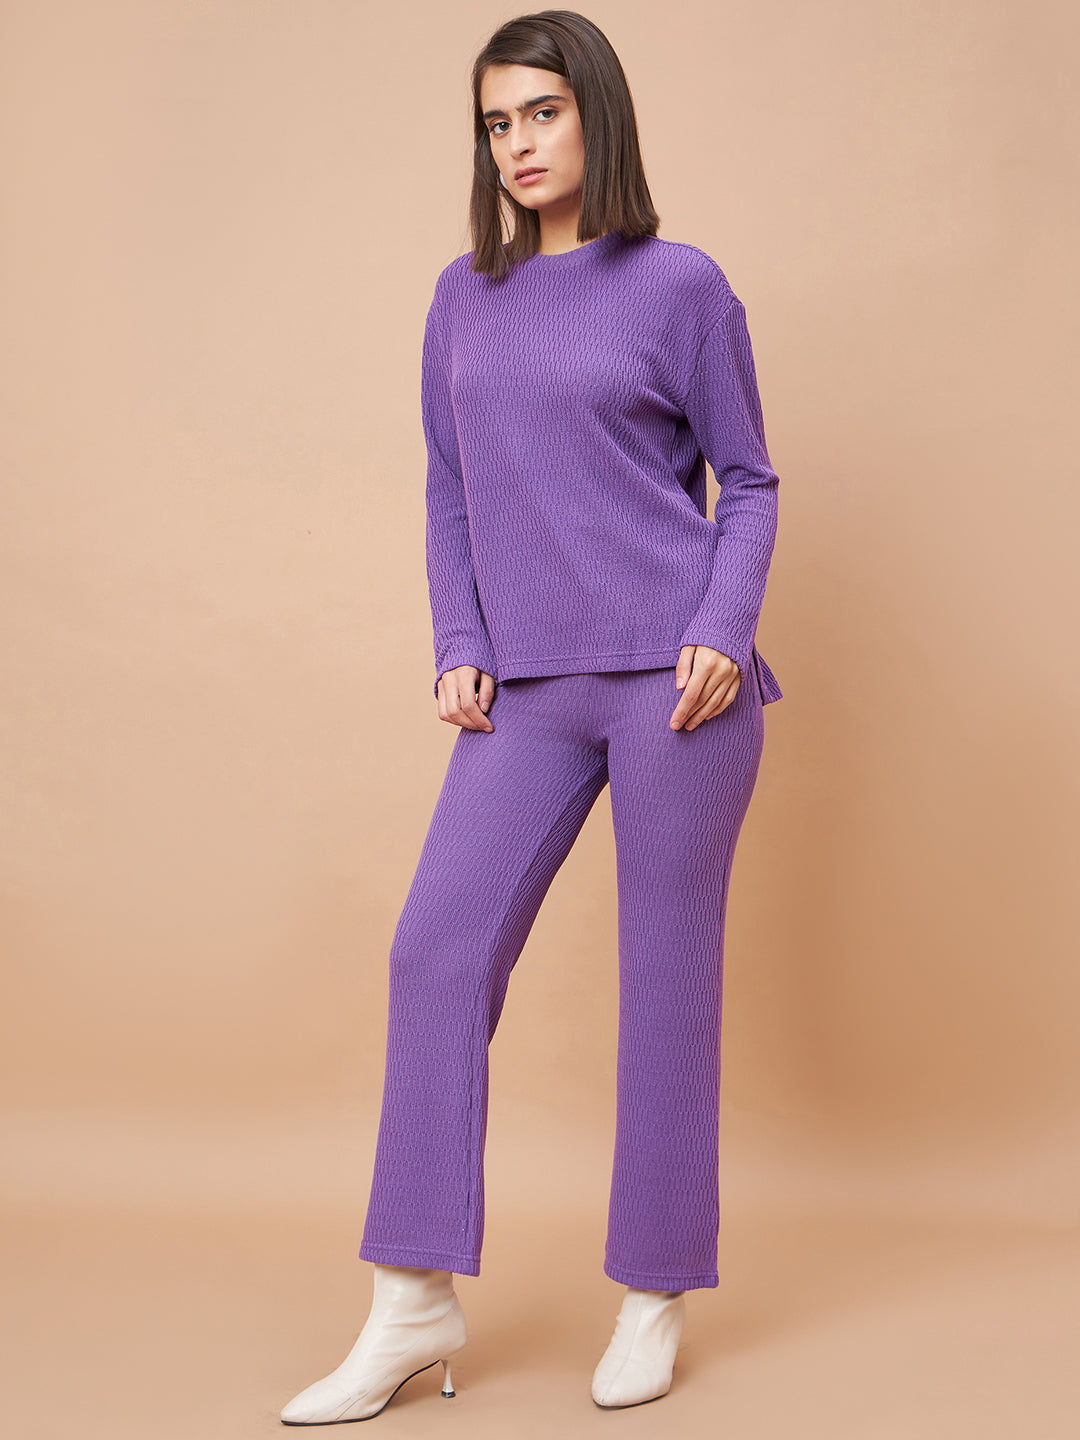 Gipsy Women Round Neck Straight Full Sleeve Poly Knit Fabric Purple Co-Ord Set